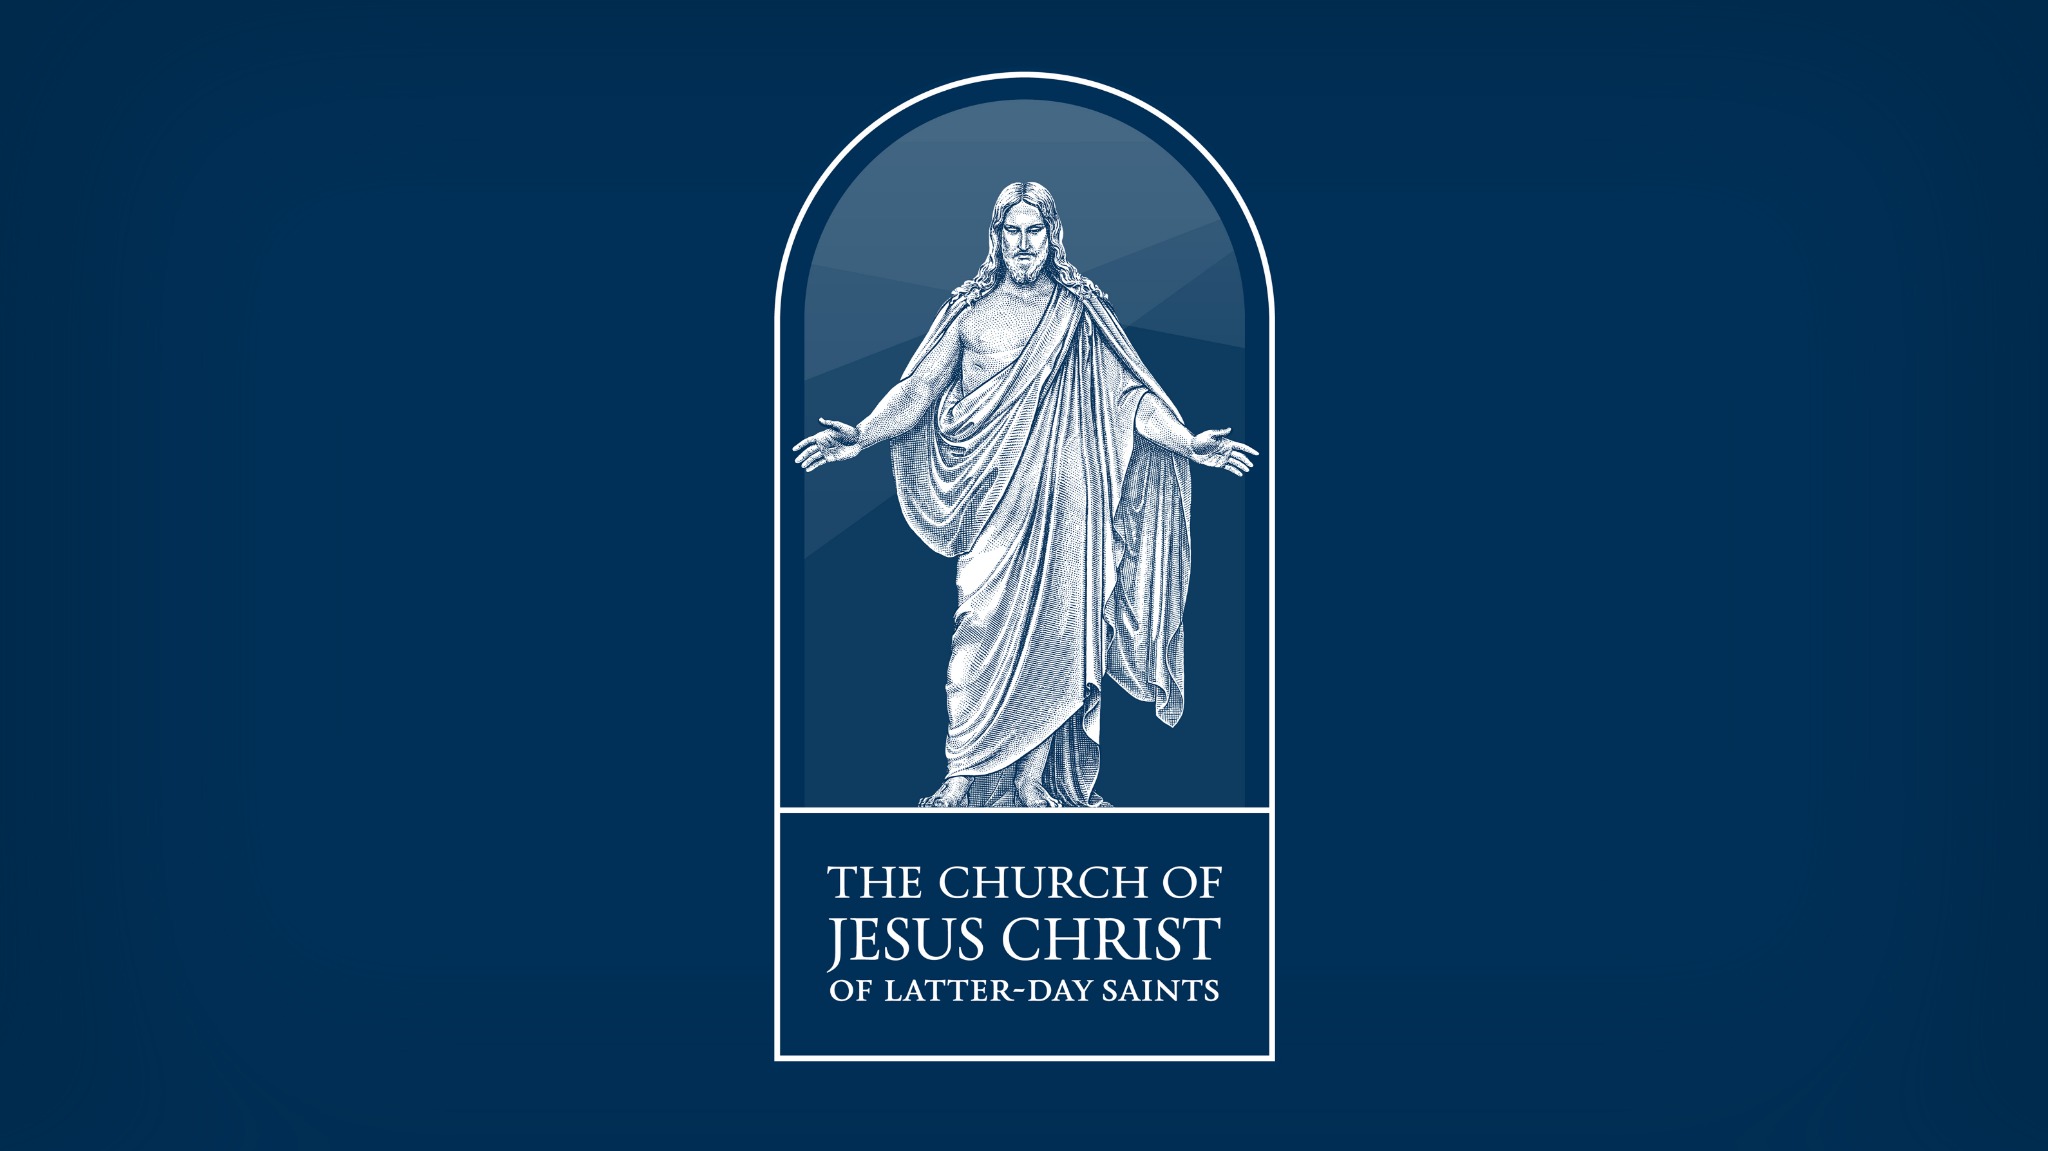 The Church's New Symbol Emphasizes the Centrality of the Savior